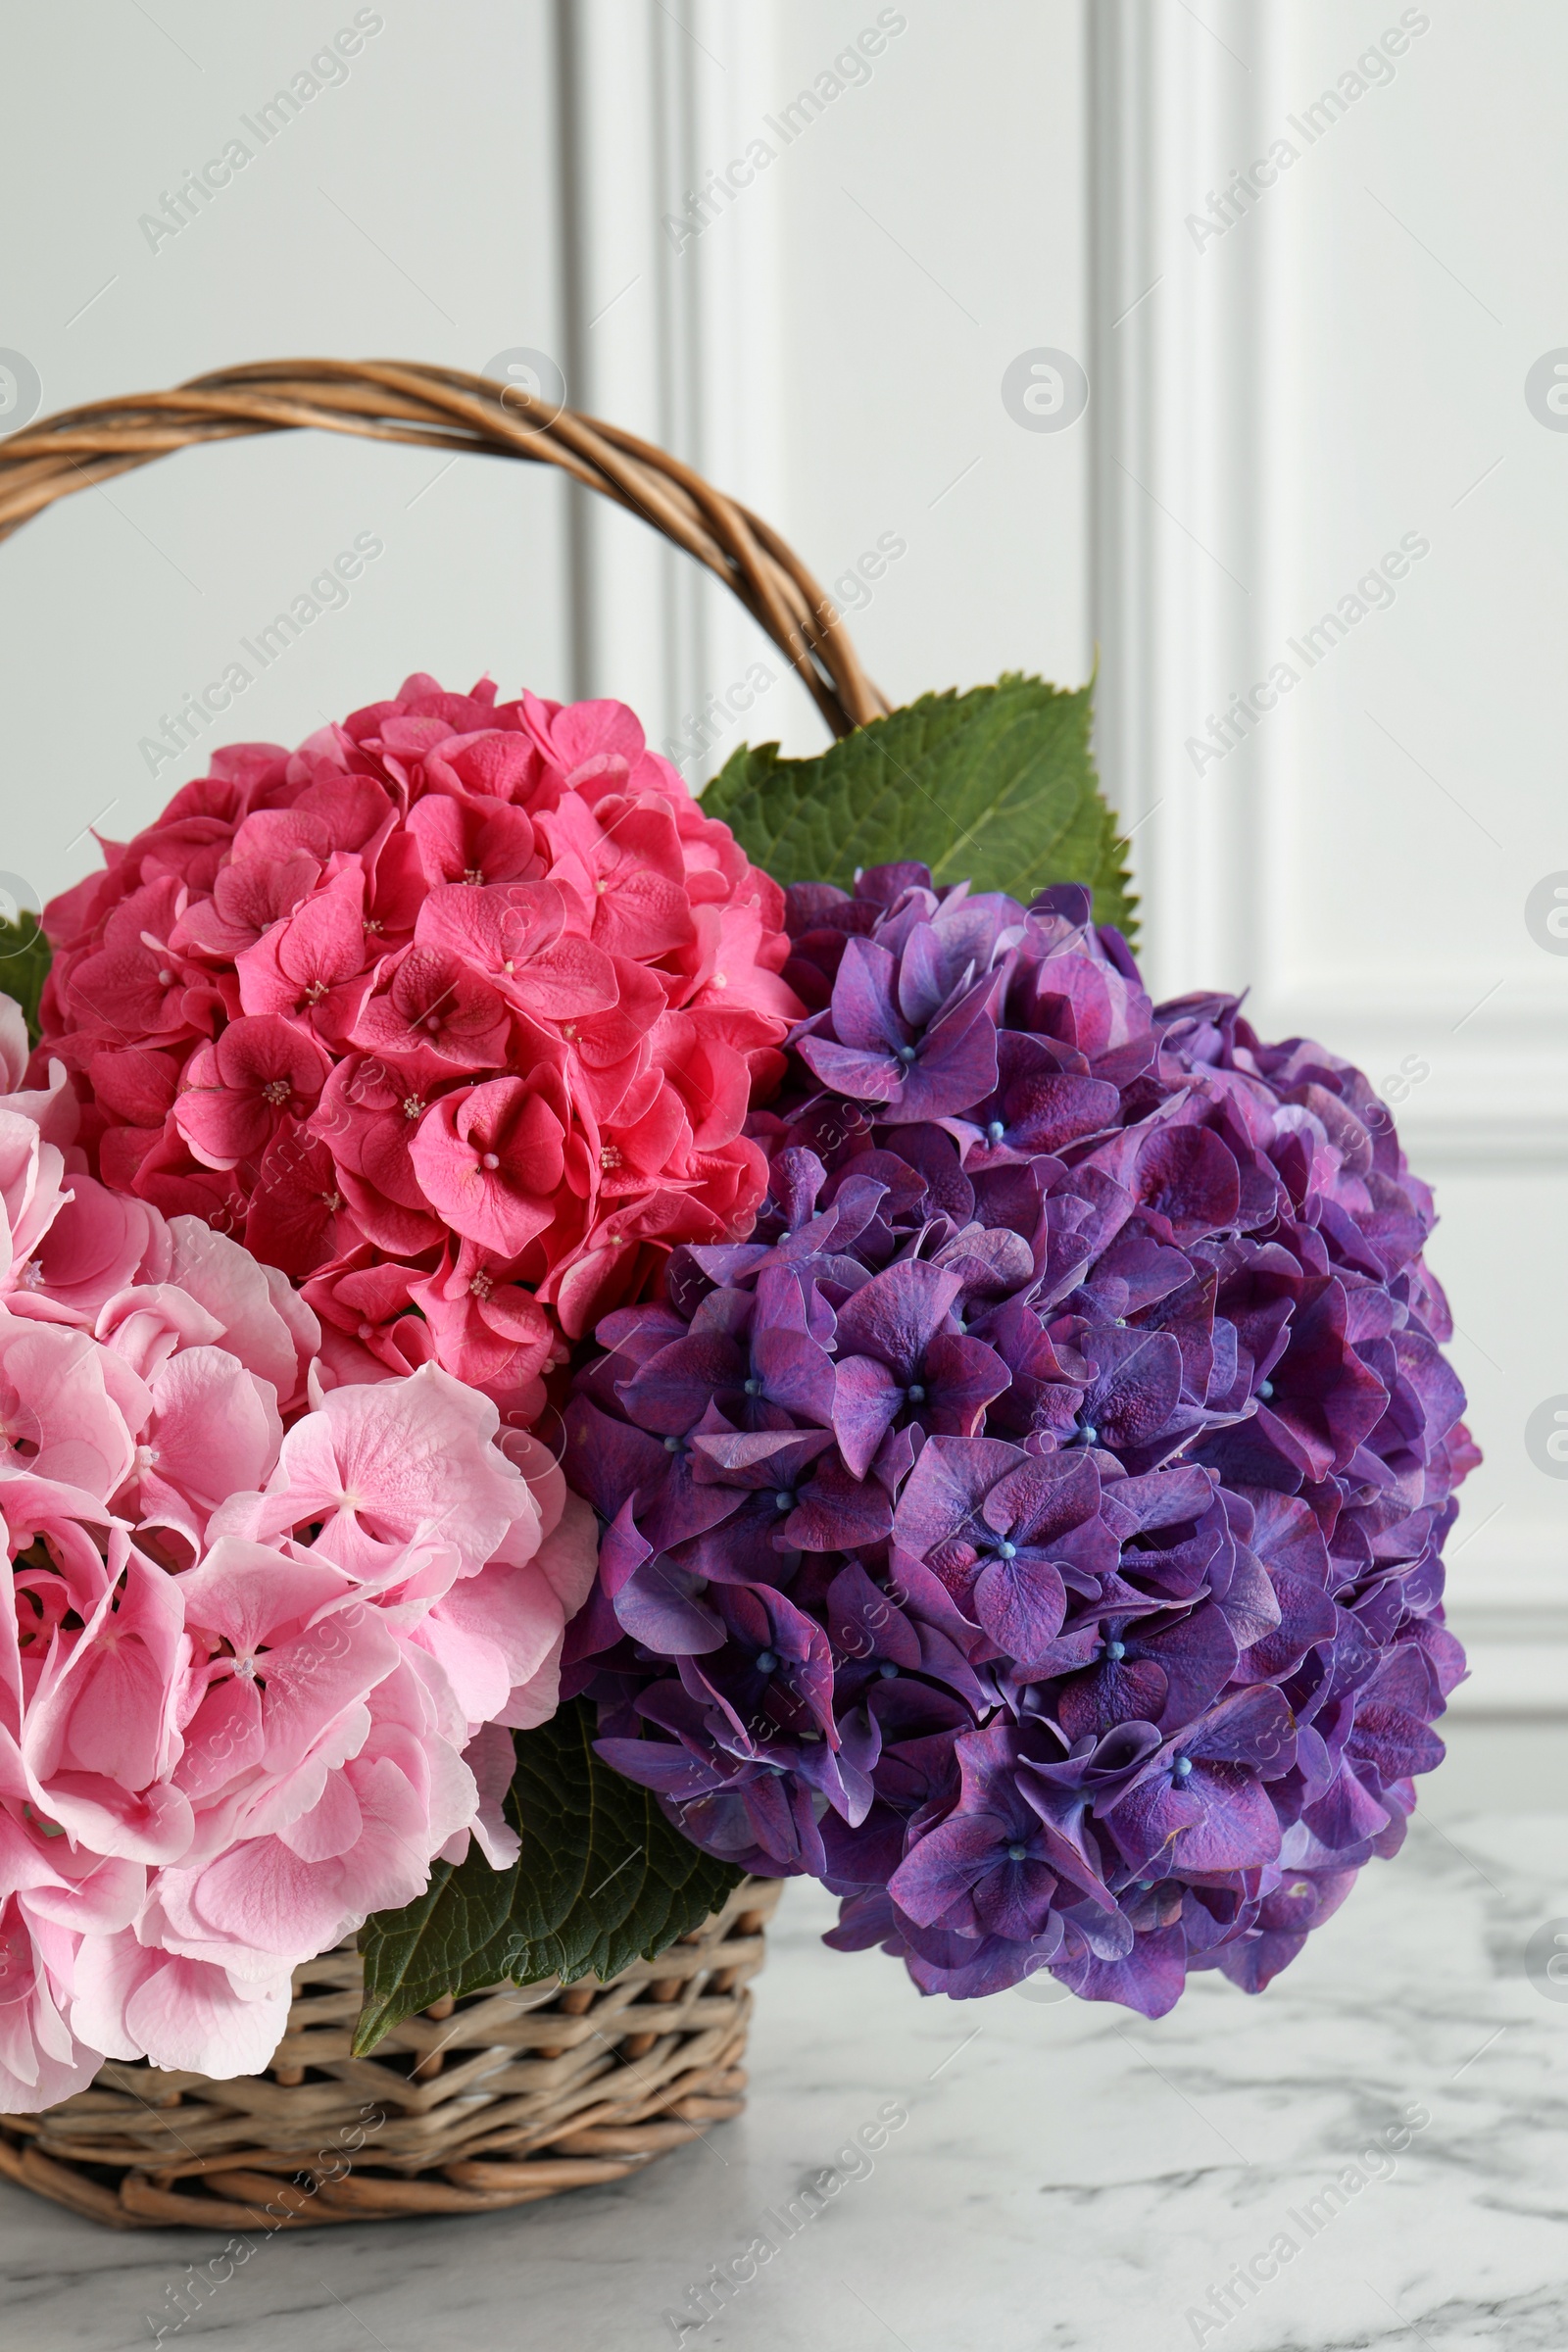 Photo of Bouquet with beautiful hortensia flowers in wicker basket on white marble table